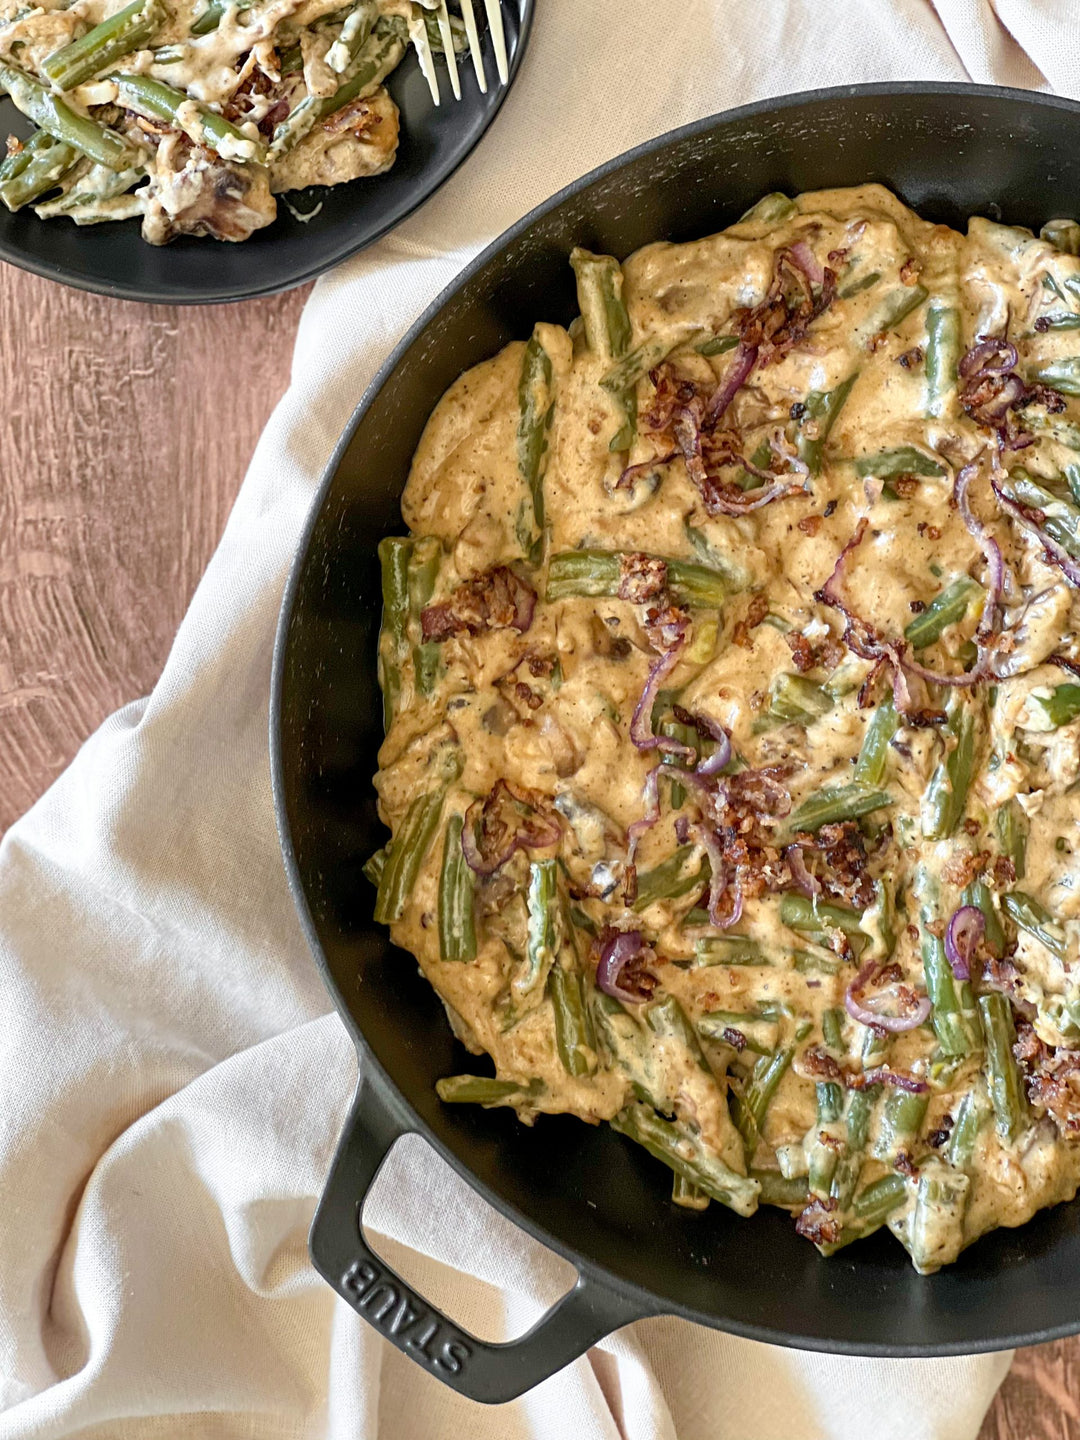 Try our made-from-scratch Stovetop Green Bean Casserole